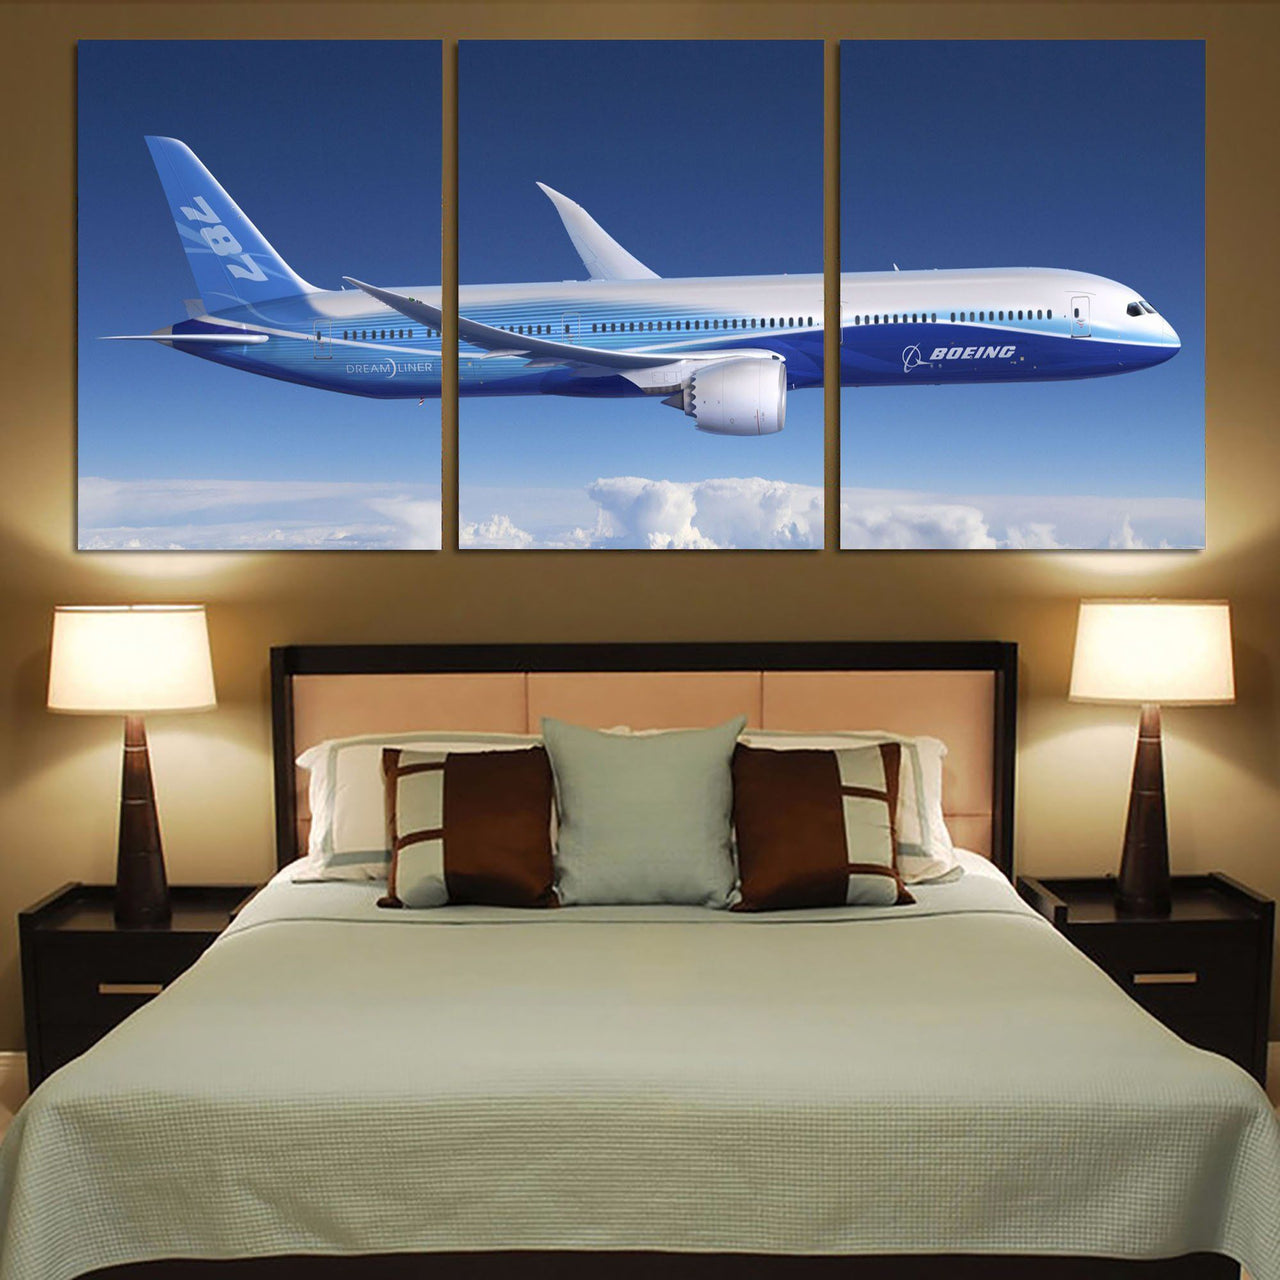 Boeing 787 Dreamliner Printed Canvas Posters (3 Pieces) Aviation Shop 